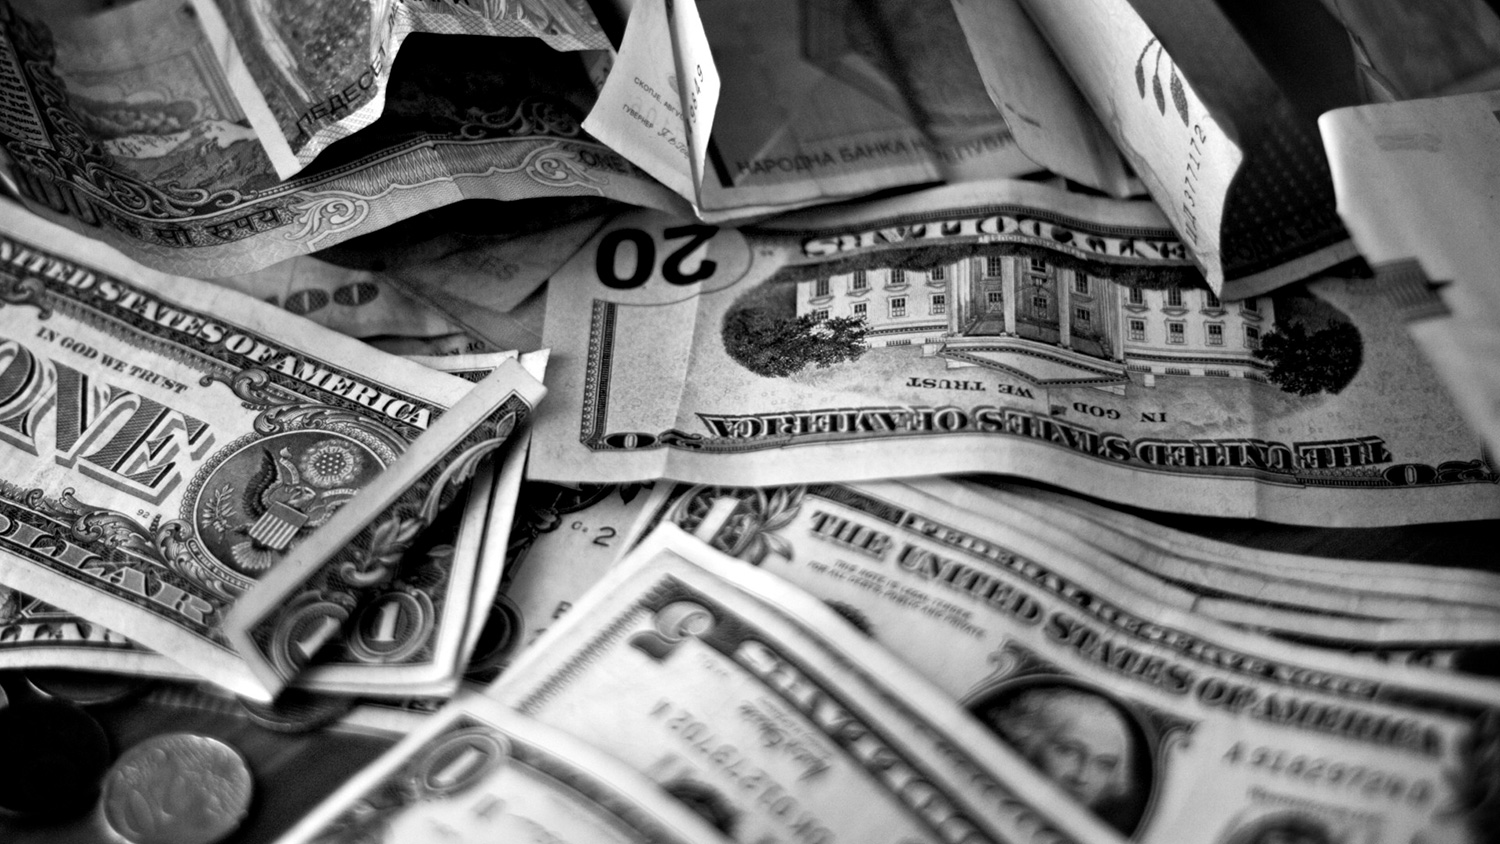 Money display, black and white photo by khrawlings, creative commons license